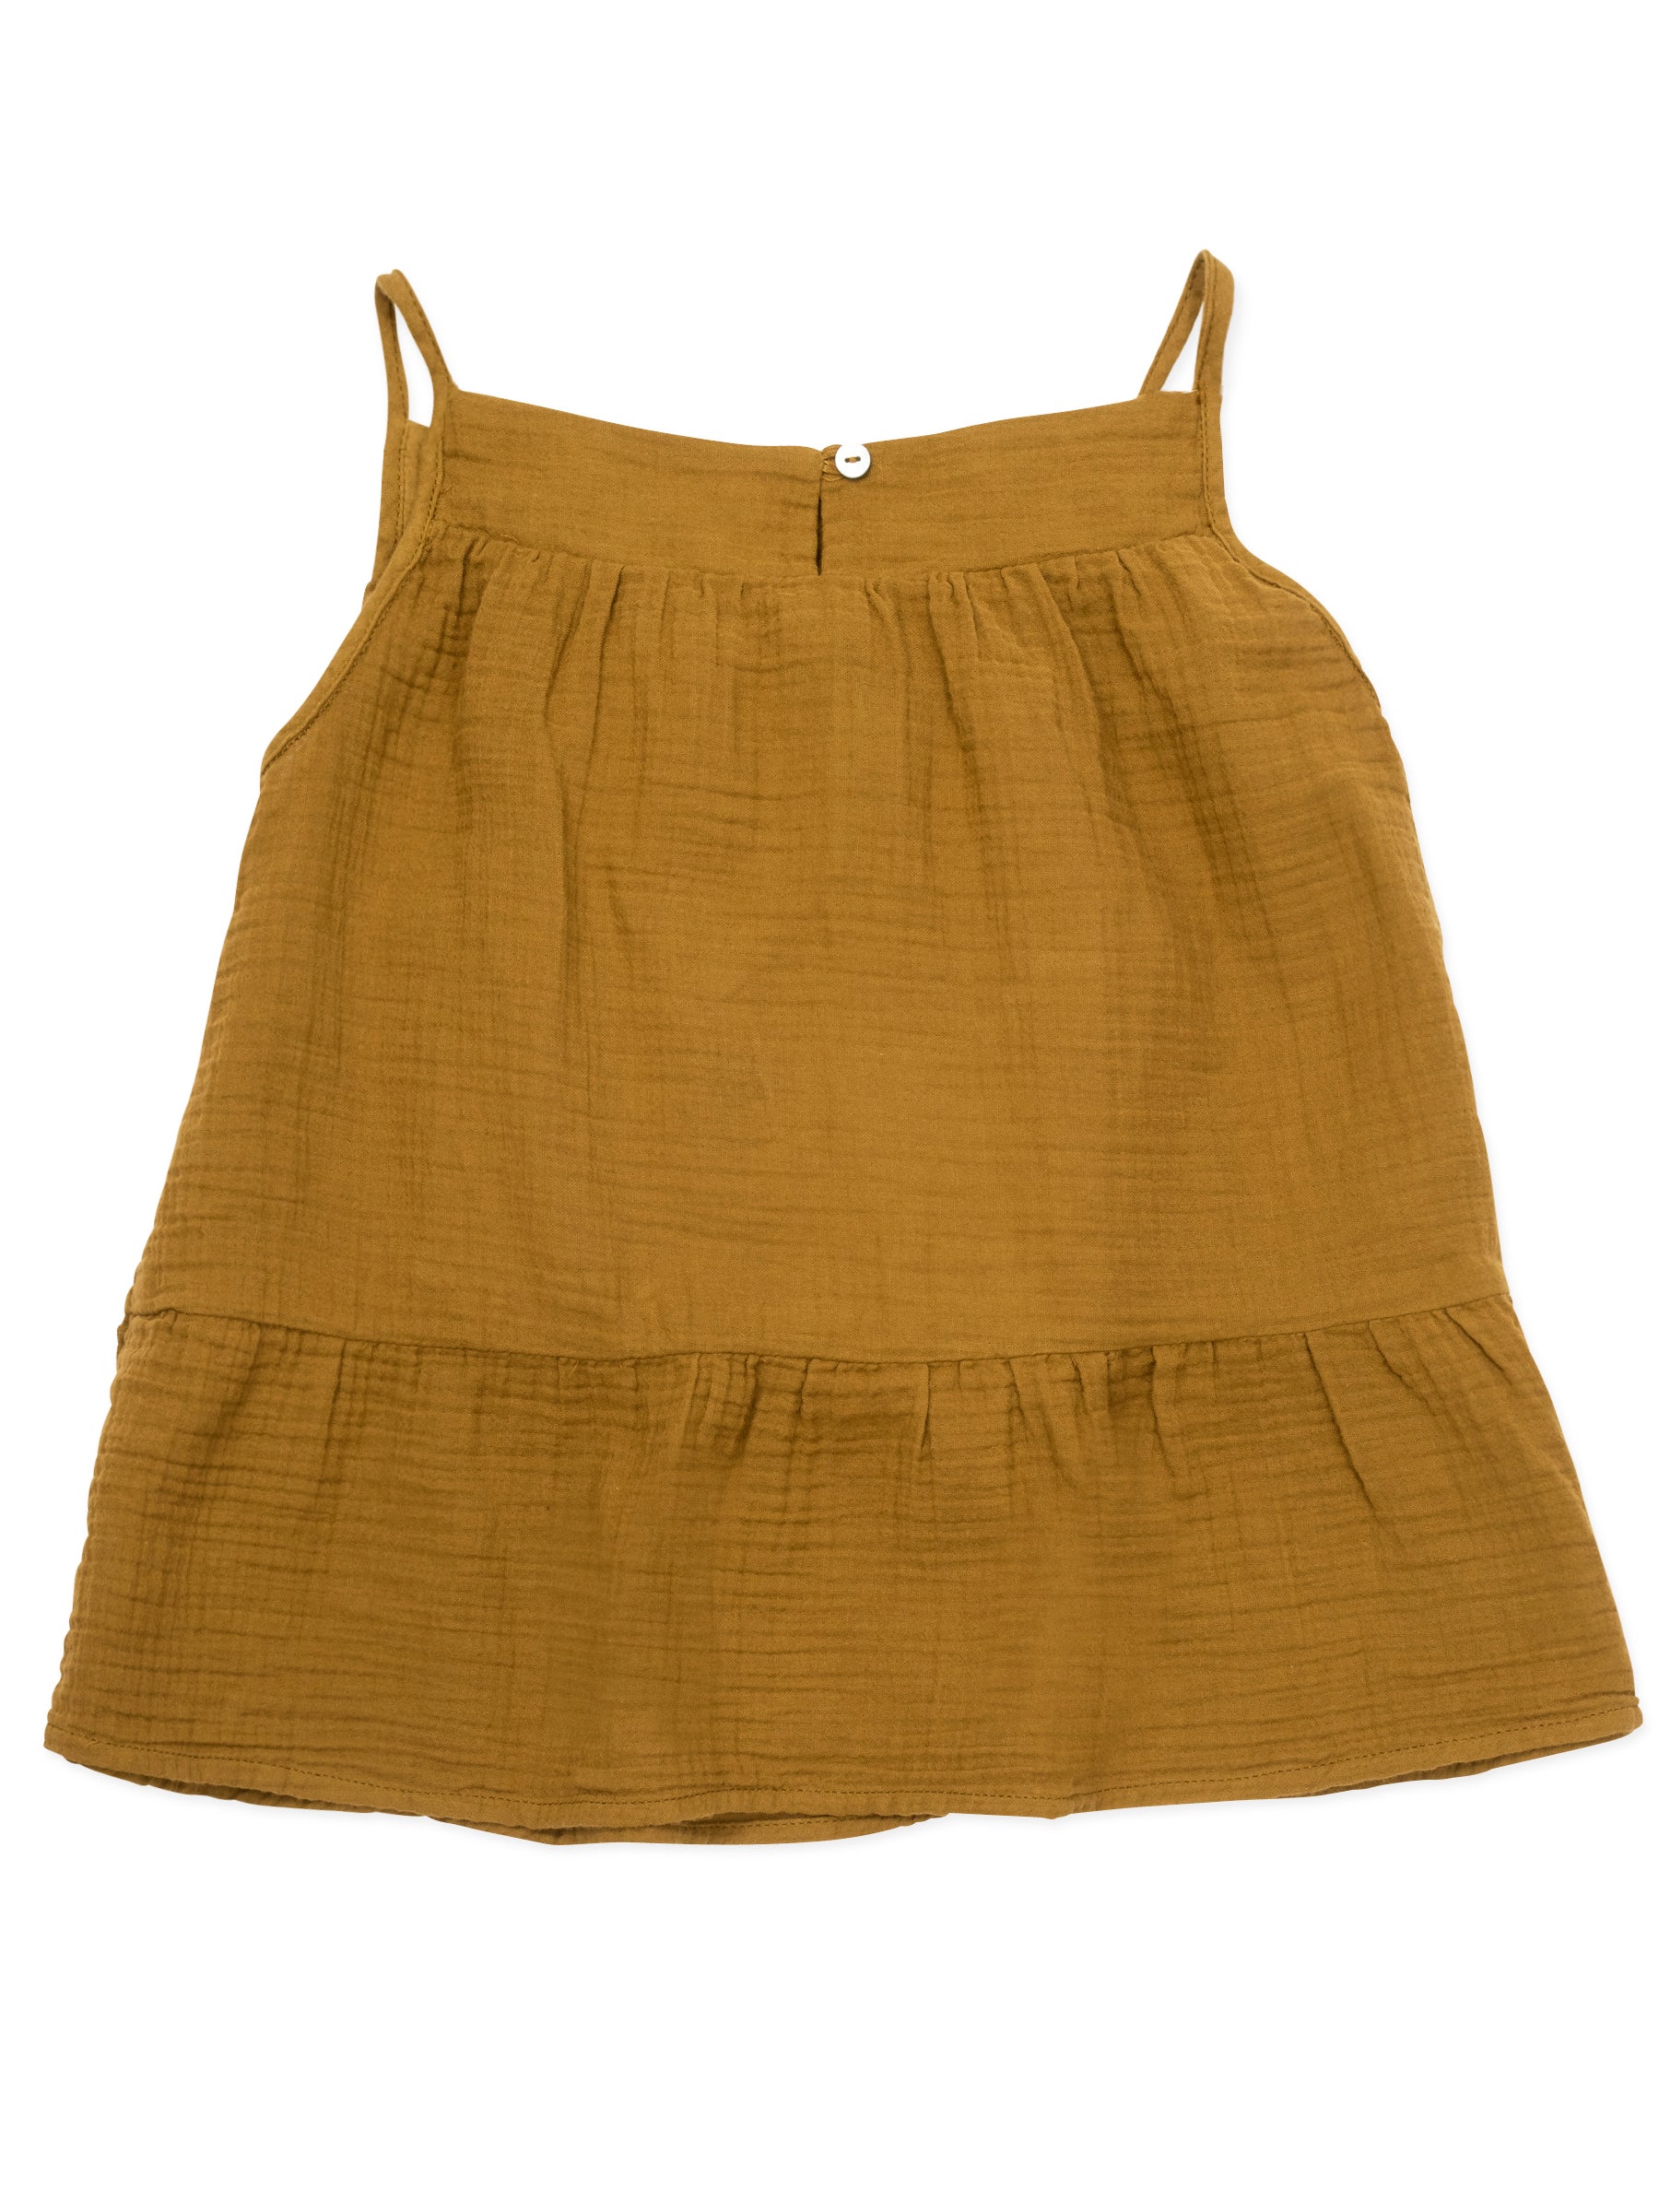 Girls Olive Cotton Top